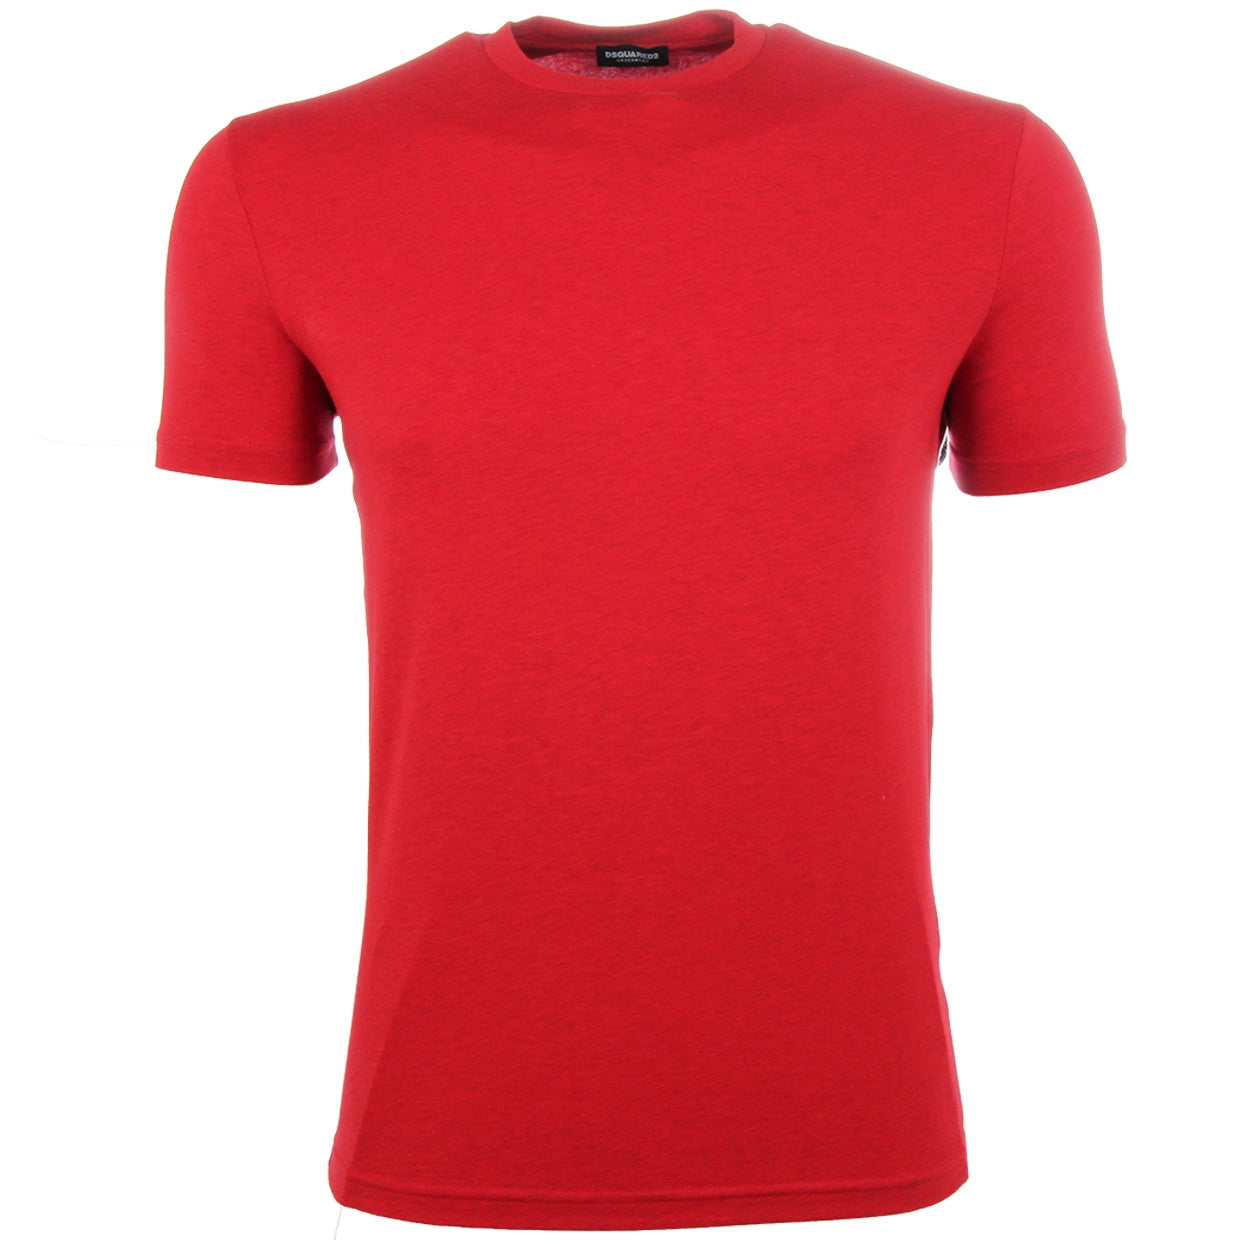 DSquared2 Red Sleeve Logo T-Shirt Front